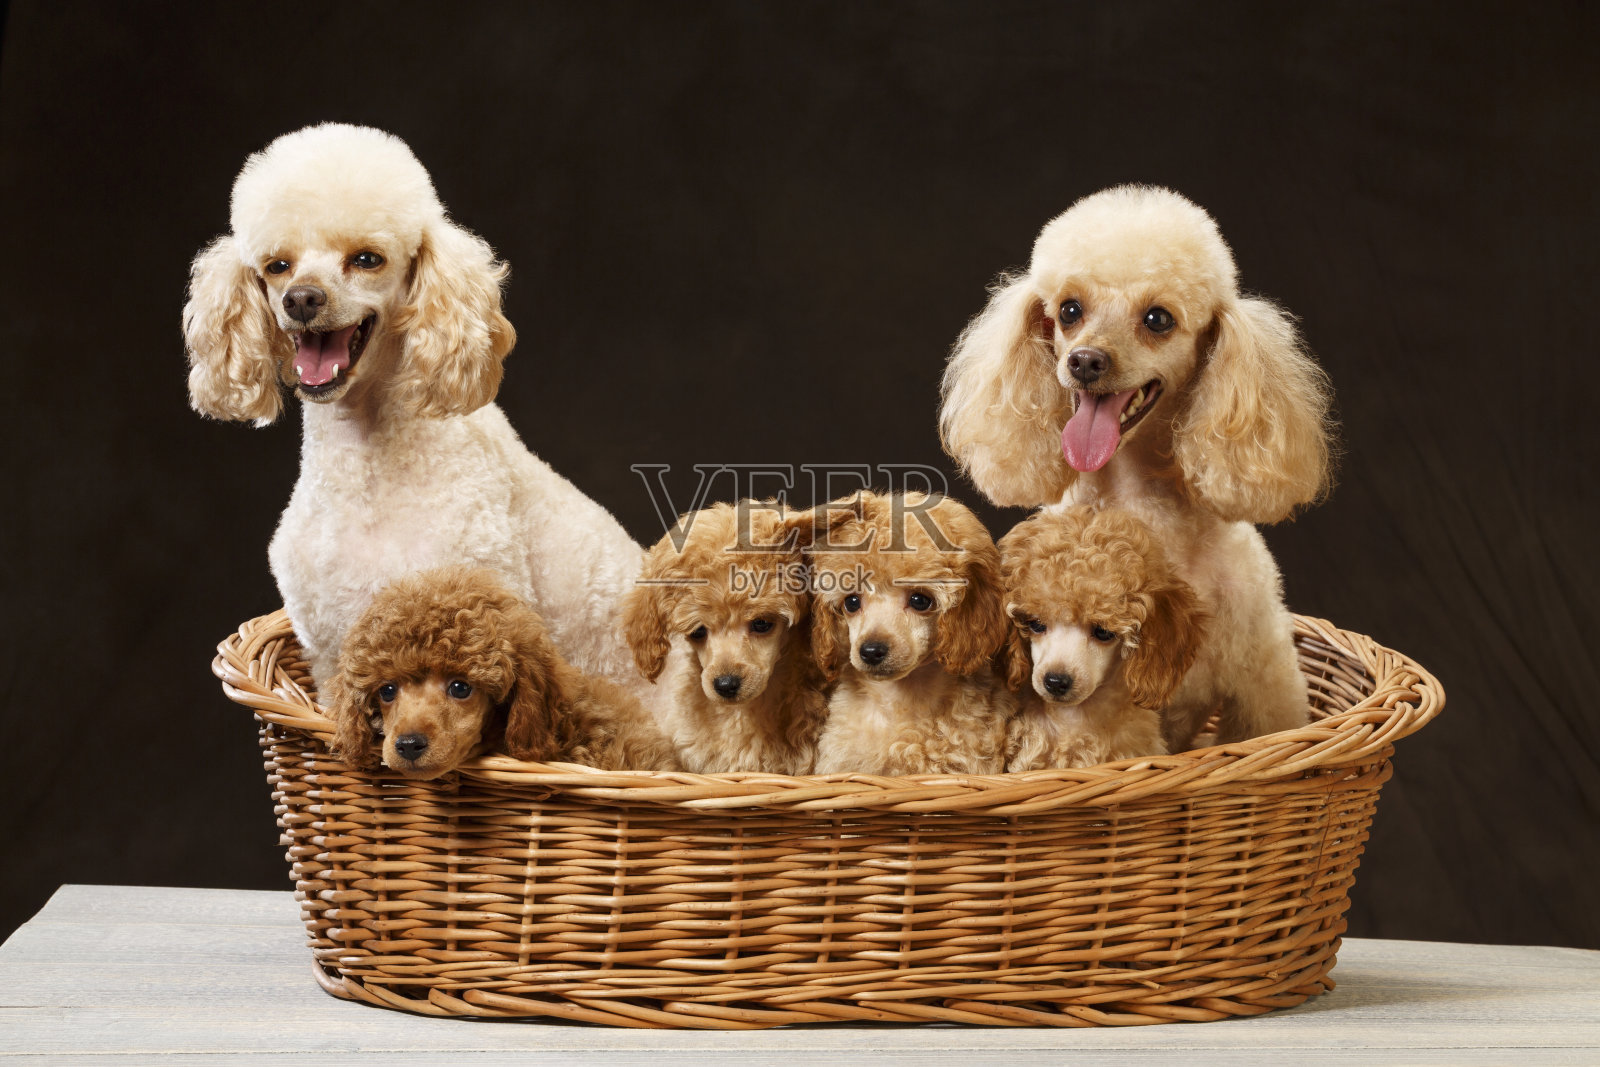 Dog The family of puddles Cute miniature poodle puppy    Six dogs照片摄影图片